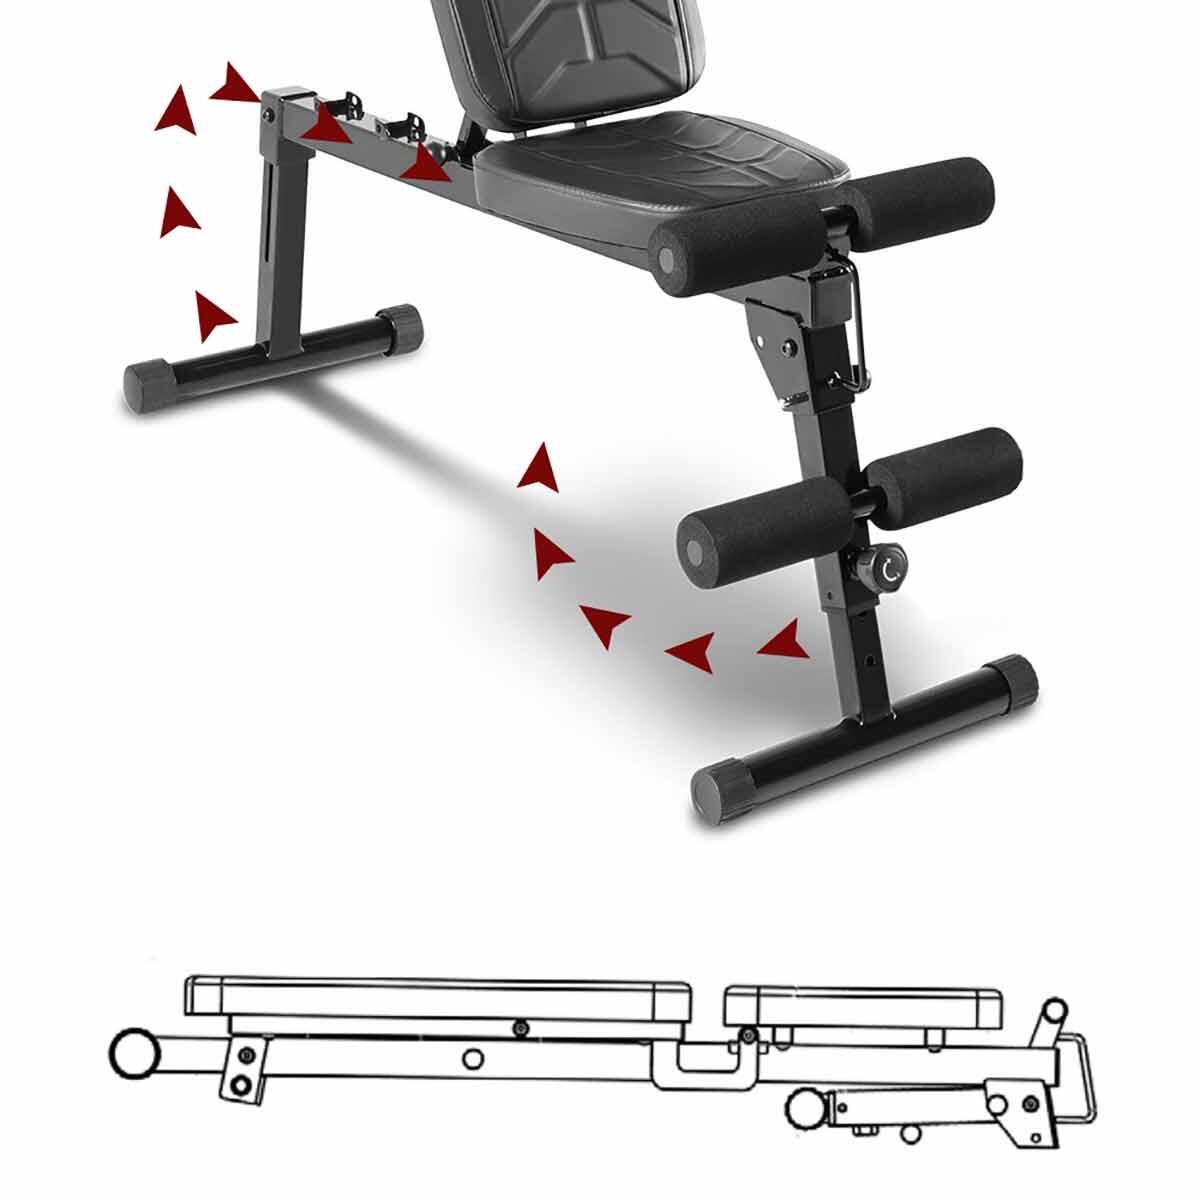 MARCY PRO PM-10110 EASY BUILD DELUXE ADJUSTABLE UTILITY WEIGHT BENCH 6/7